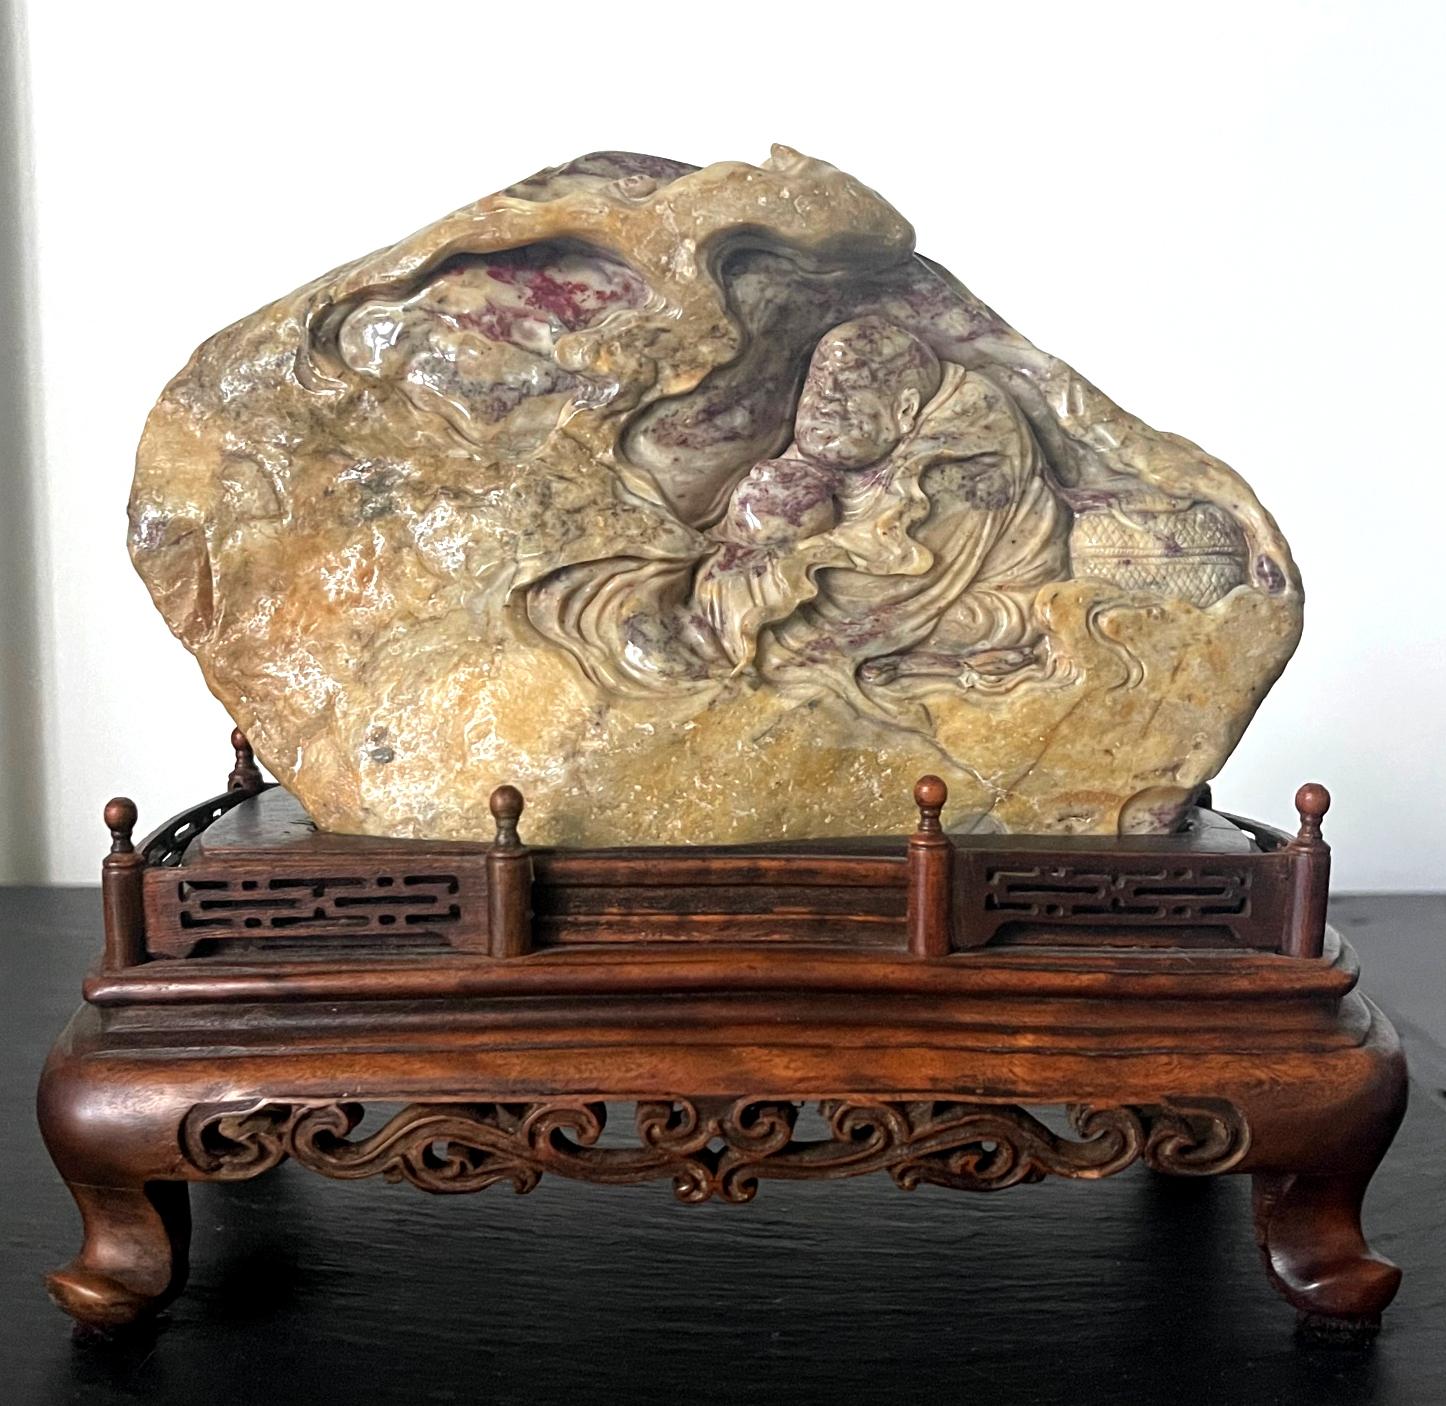 A small chicken blood stone carving from China circa early 20th century, possibly early (late Qing to early Republic period). It depicts an aged Bodhidharma meditating in a cave. The stone was identified as chicken blood stone, a rock of